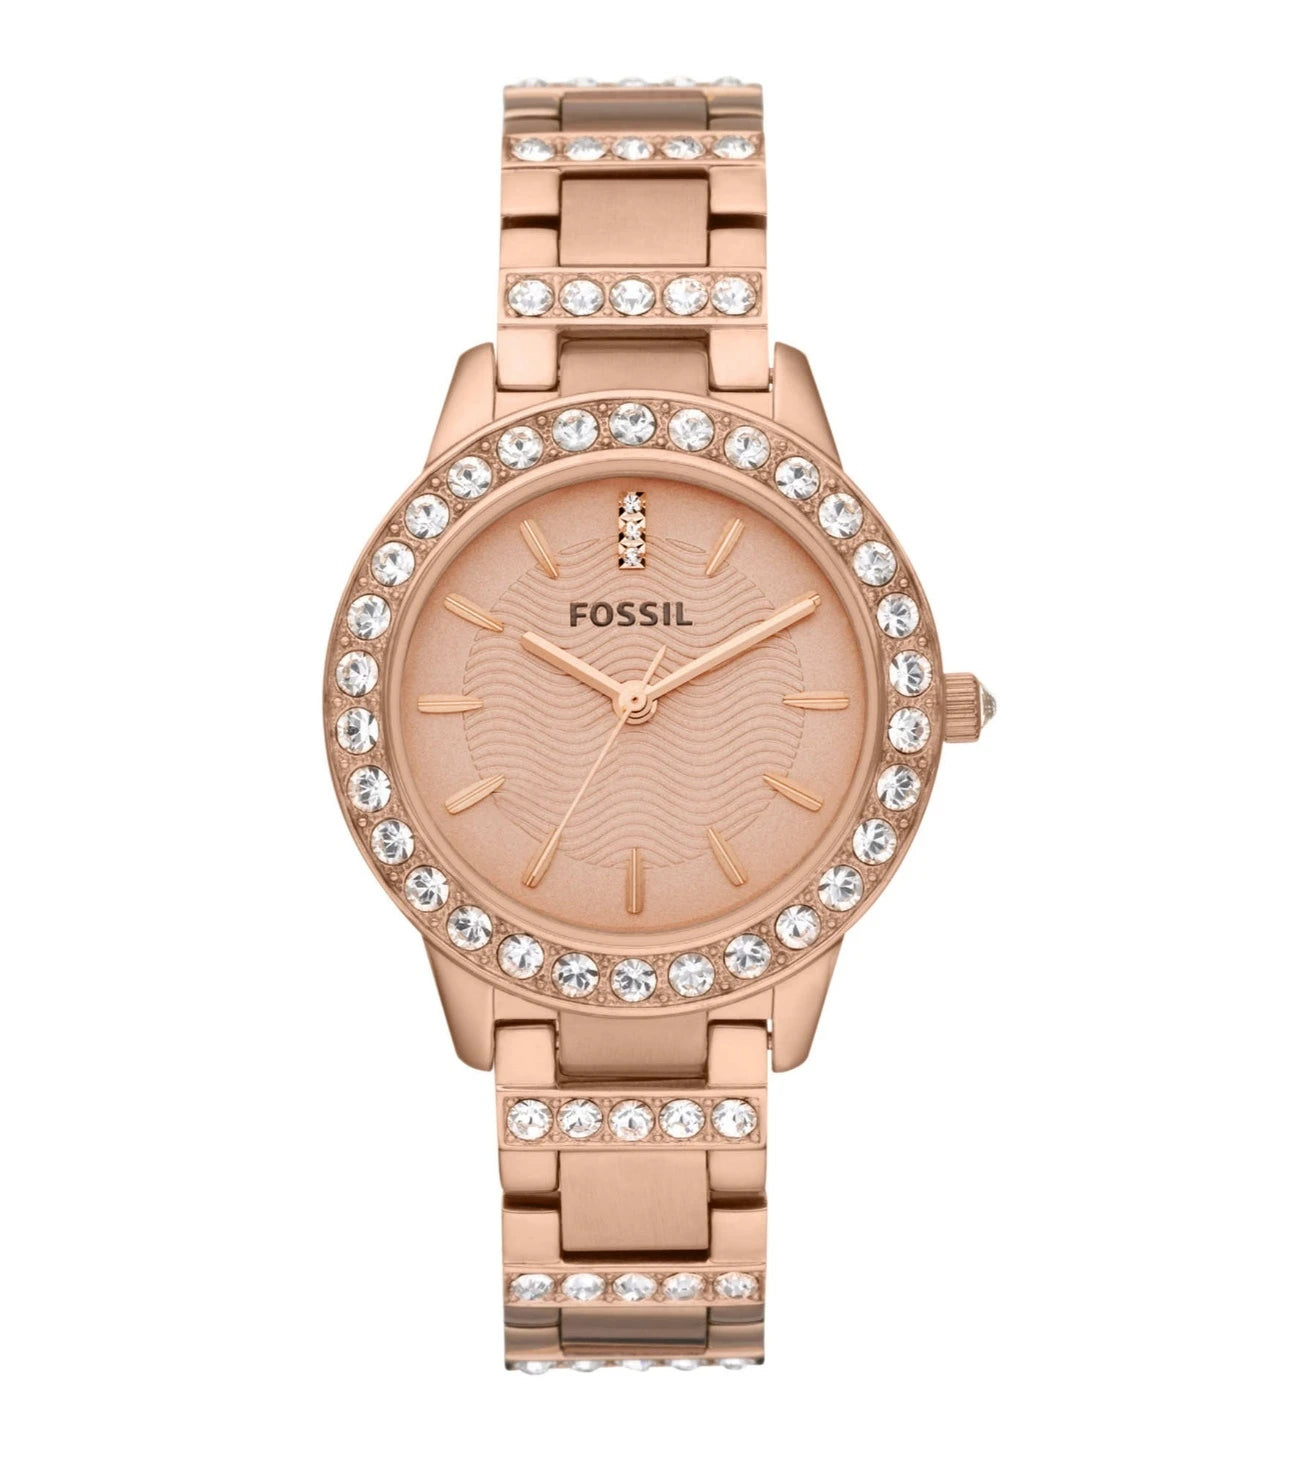 ES3020 | FOSSIL Jesse Analog Watch for Women